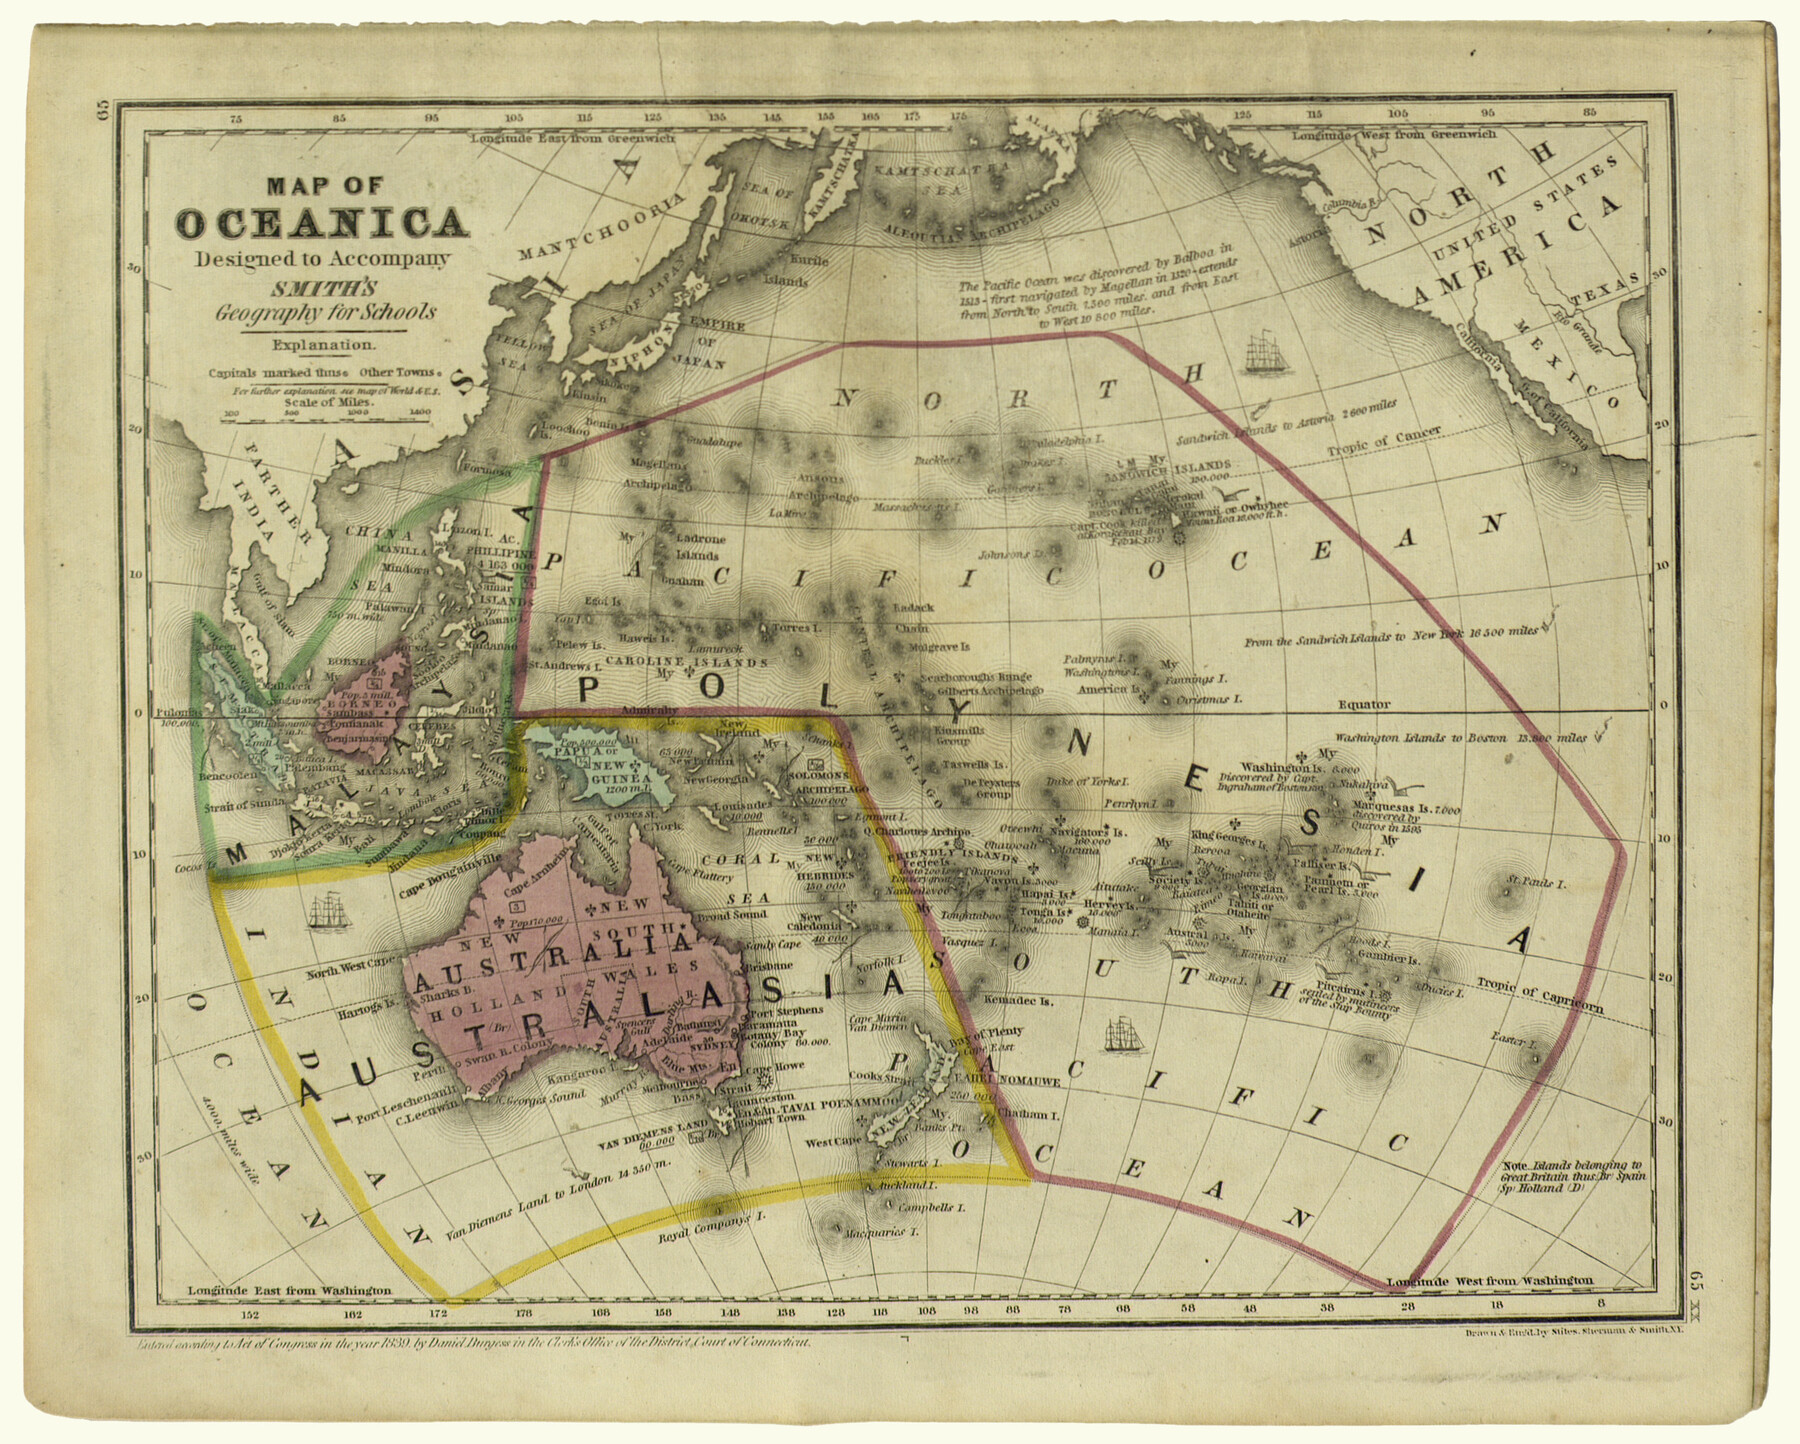 93898, Map of Oceanica designed to accompany Smith's Geography for Schools, Holcomb Digital Map Collection